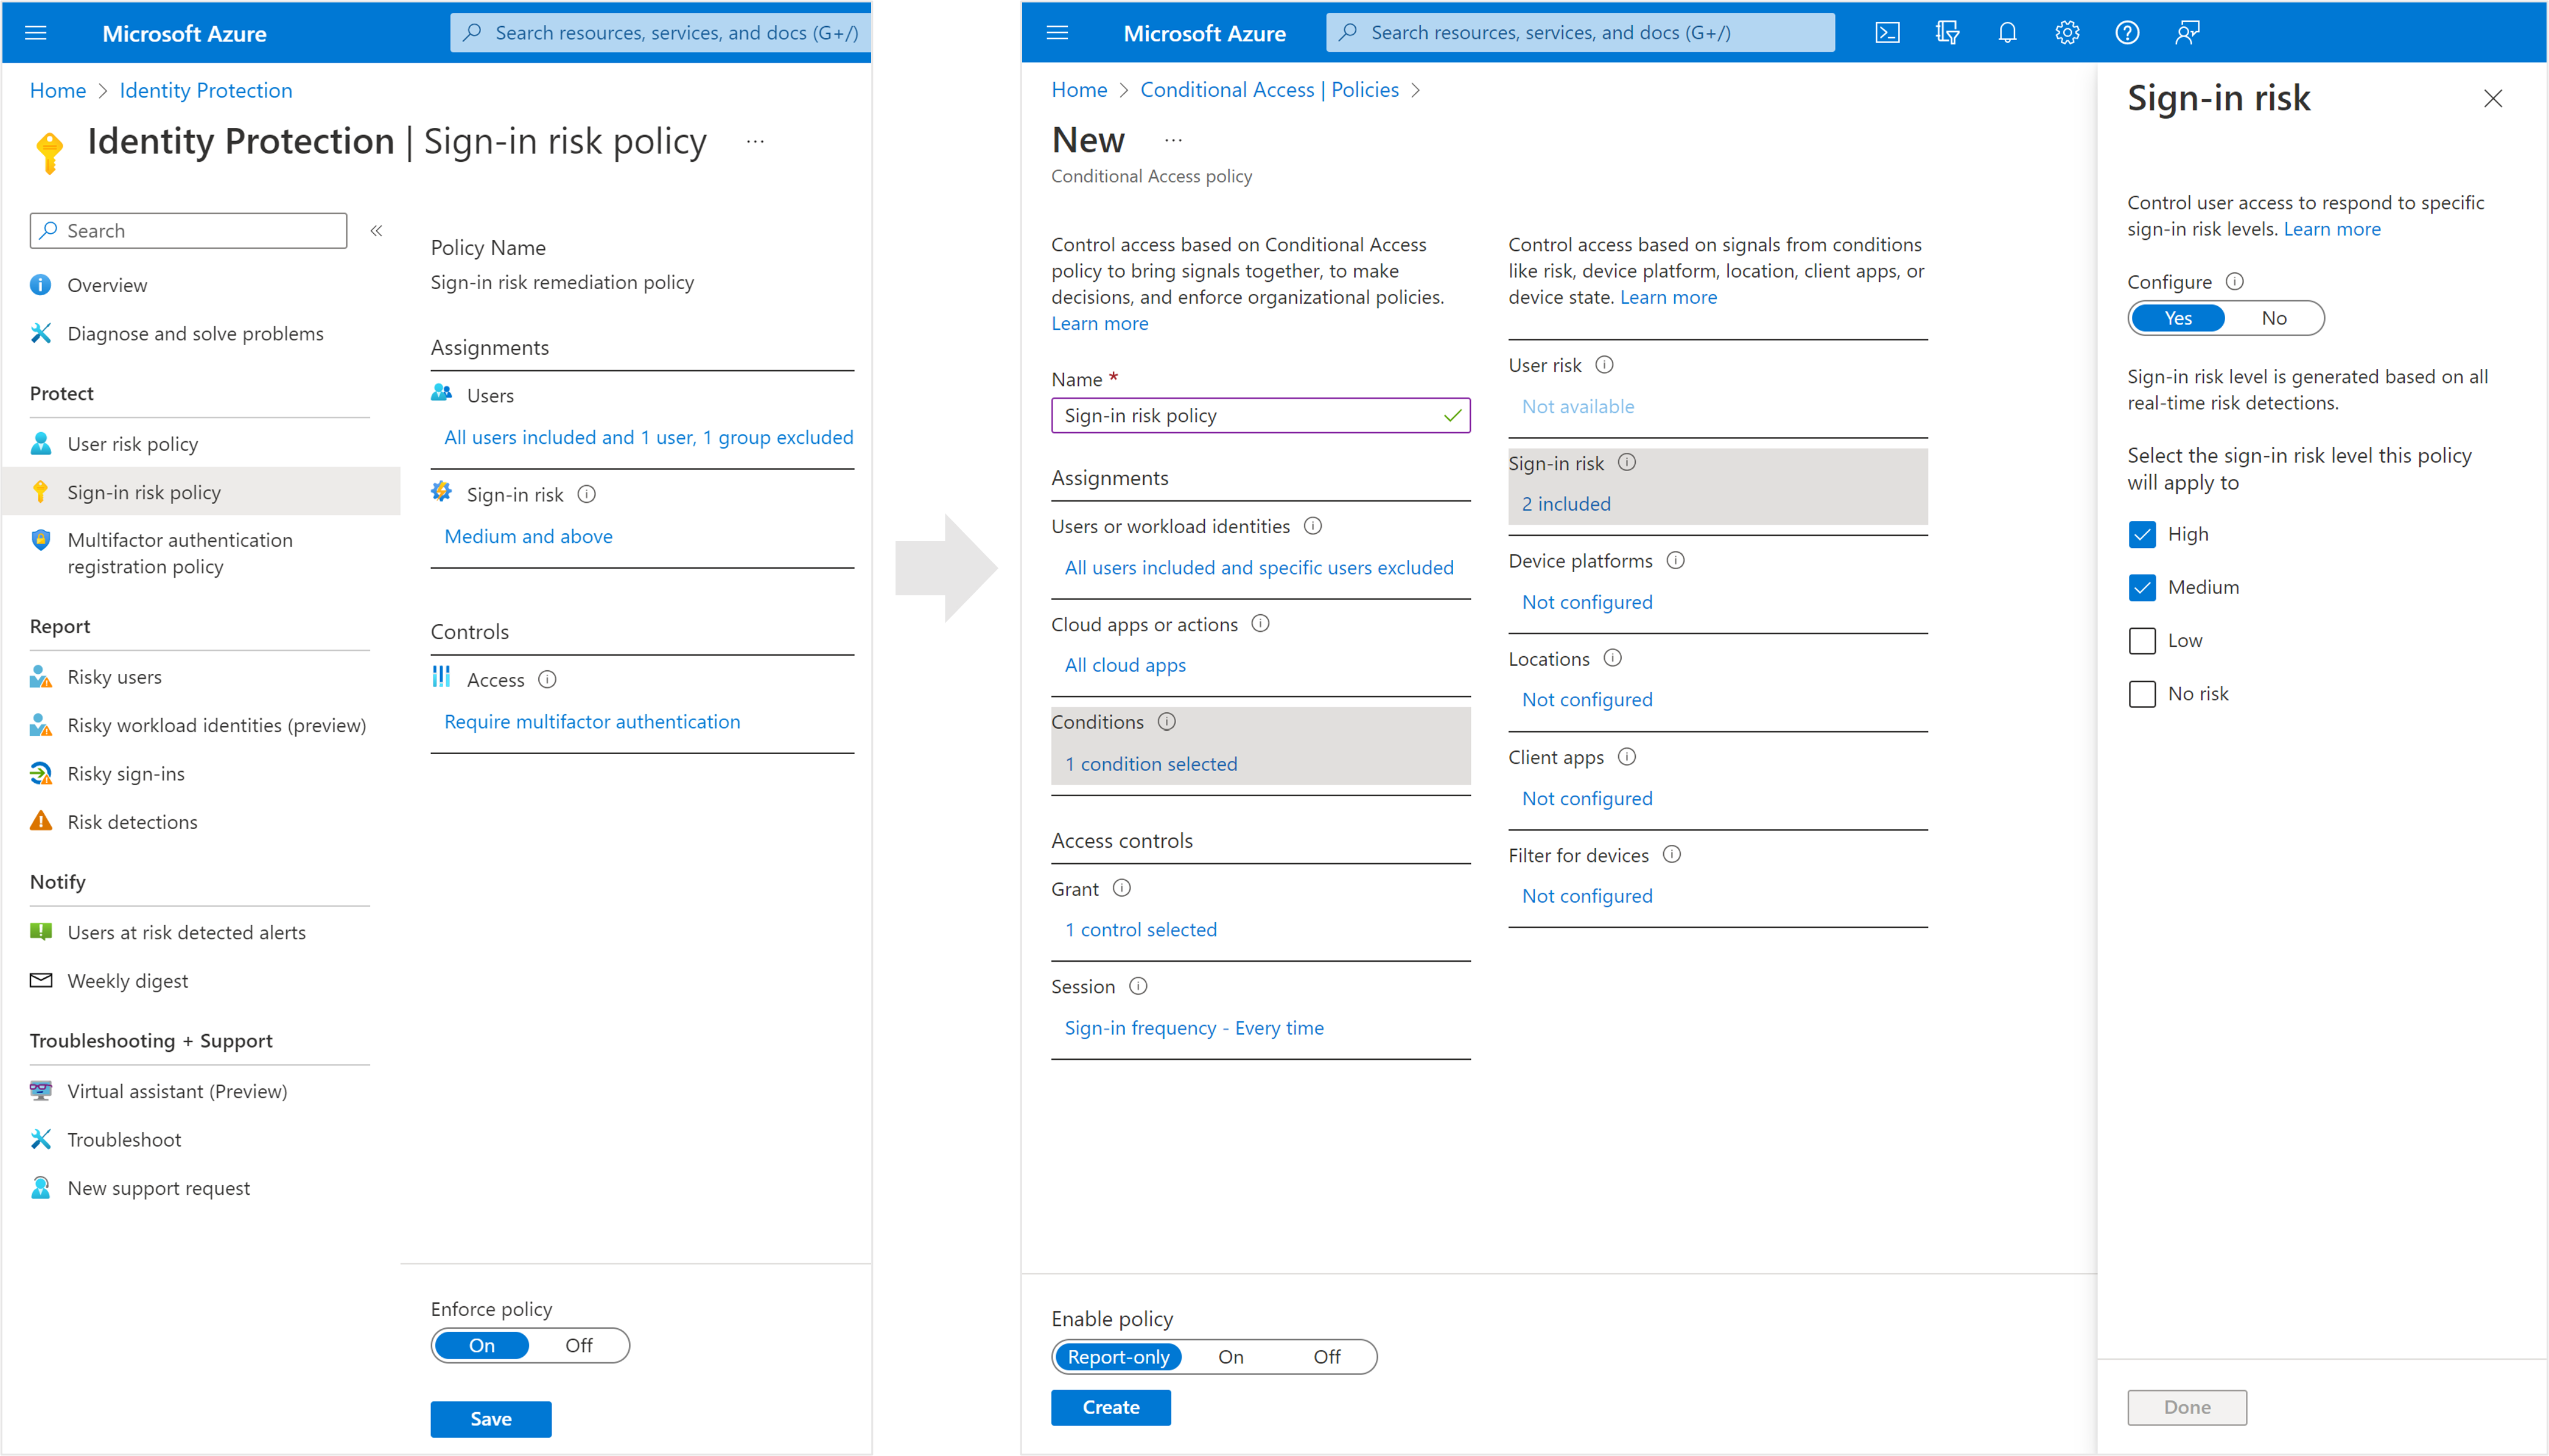 Screenshots showing the migration of a sign-in risk policy to Conditional Access.